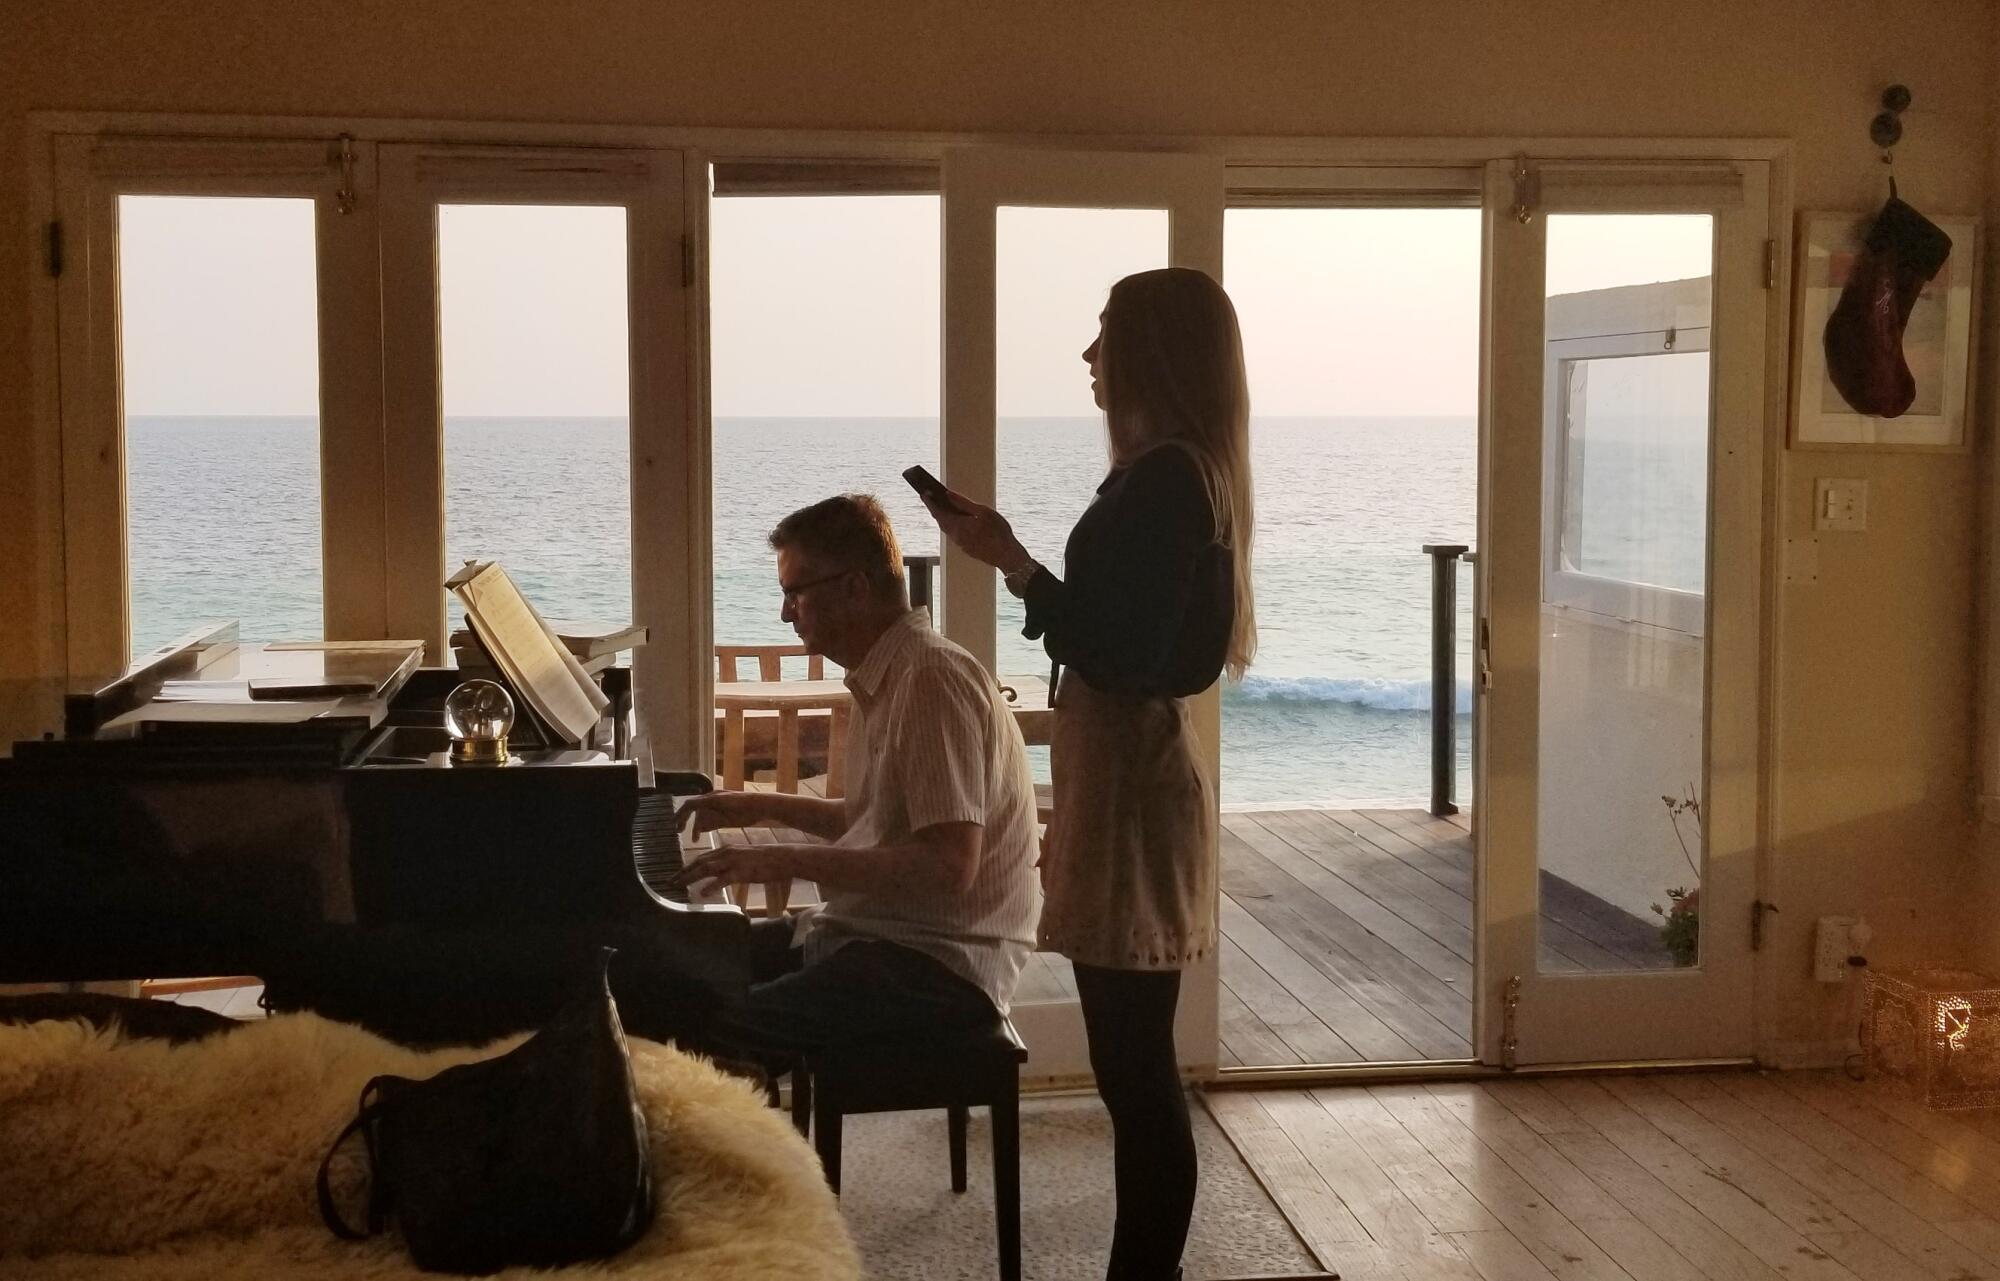 Mark Sawusch plays the piano at his Malibu beach house, with Anna Moore behind him.